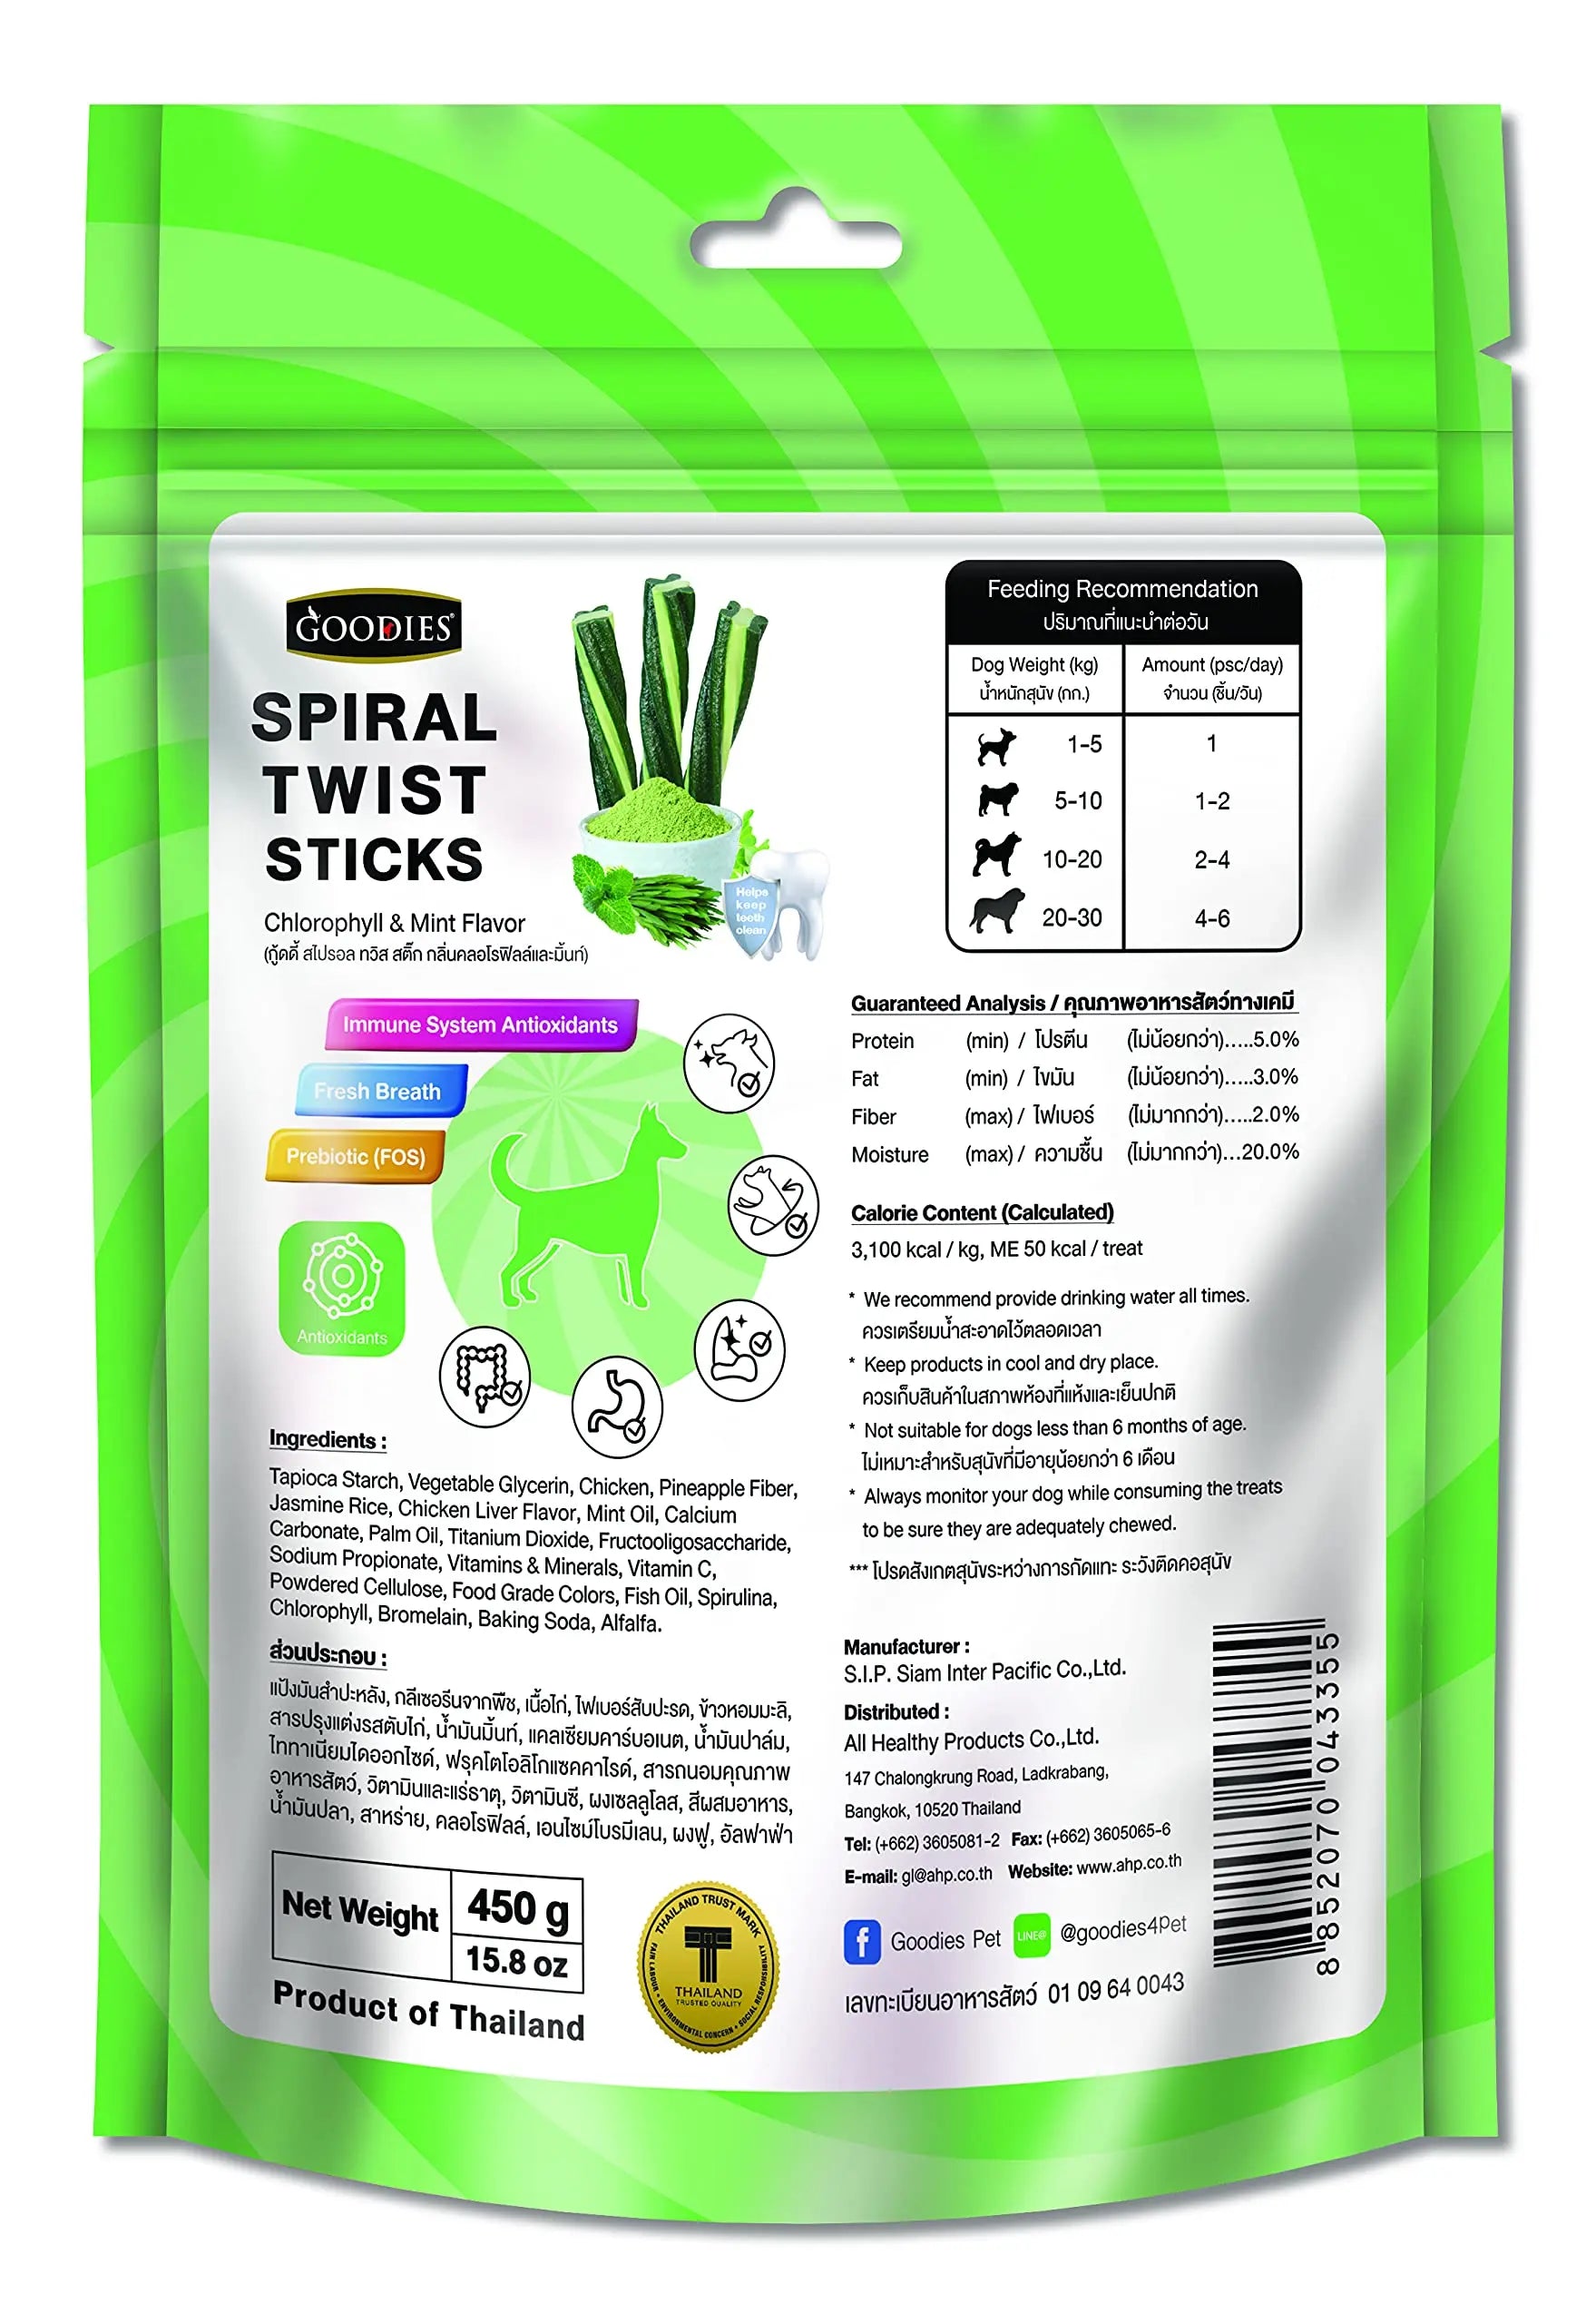 Goodies Dog Energy Treats Spiral Twist Stick Chlorophyll & Mint Flavor Flavor 98% Healthy Snack & Training Treat, Best for Dog (1 x 450g) with Free Jerhigh Milky Stick 20g (Newly Launched) Goodies